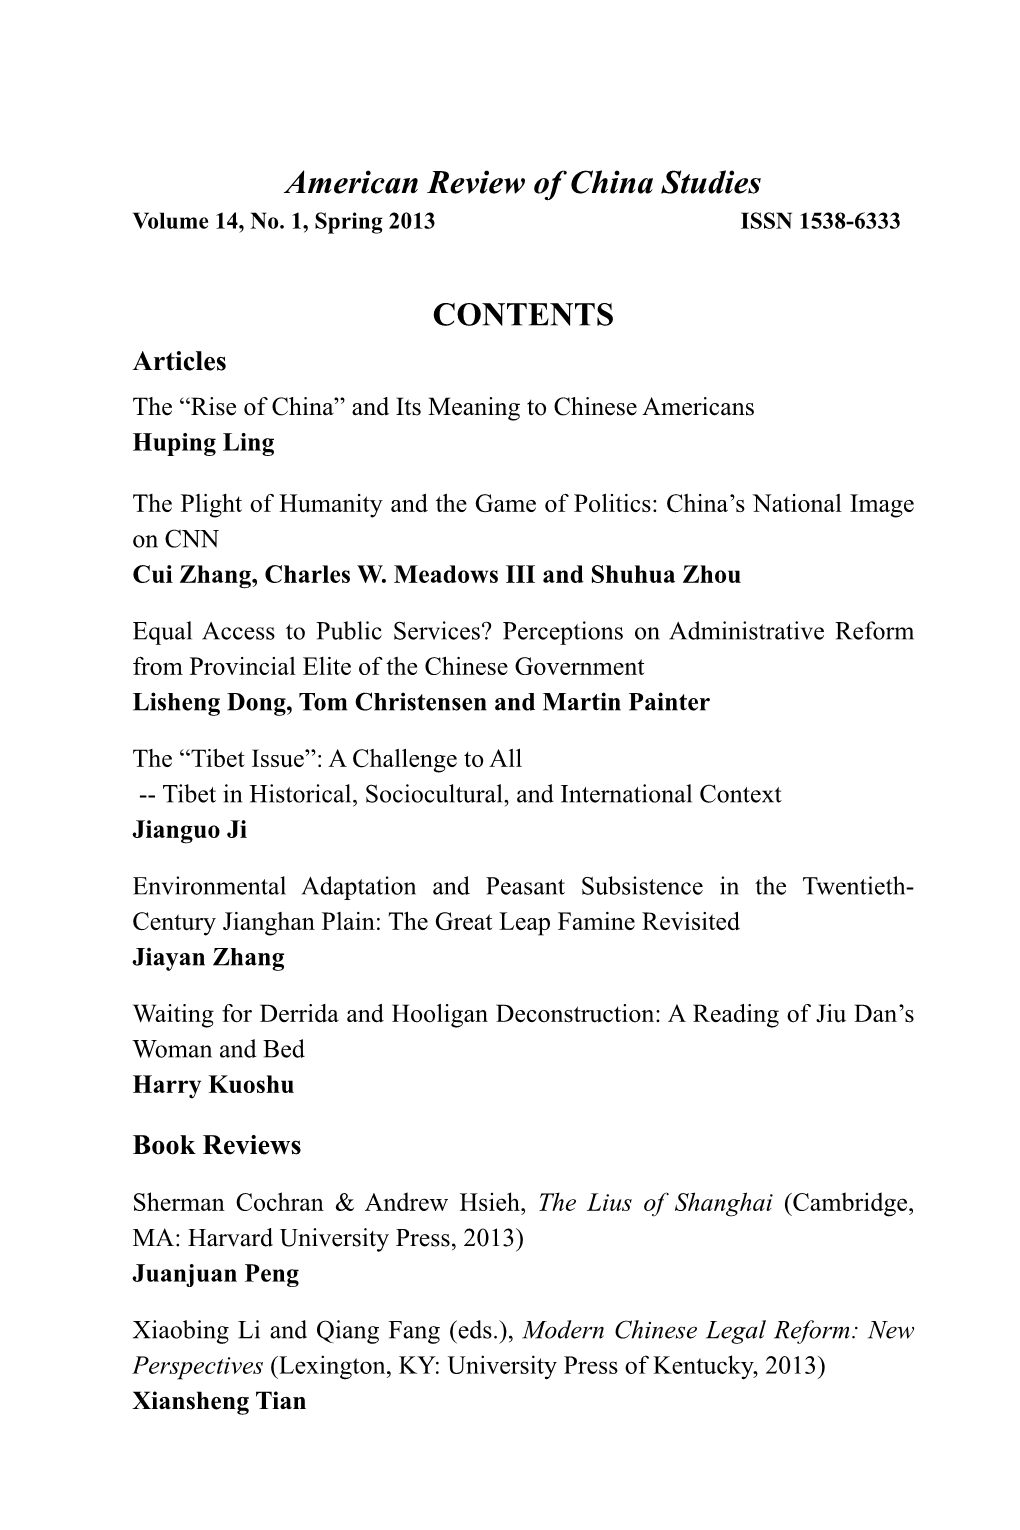 American Review of China Studies CONTENTS